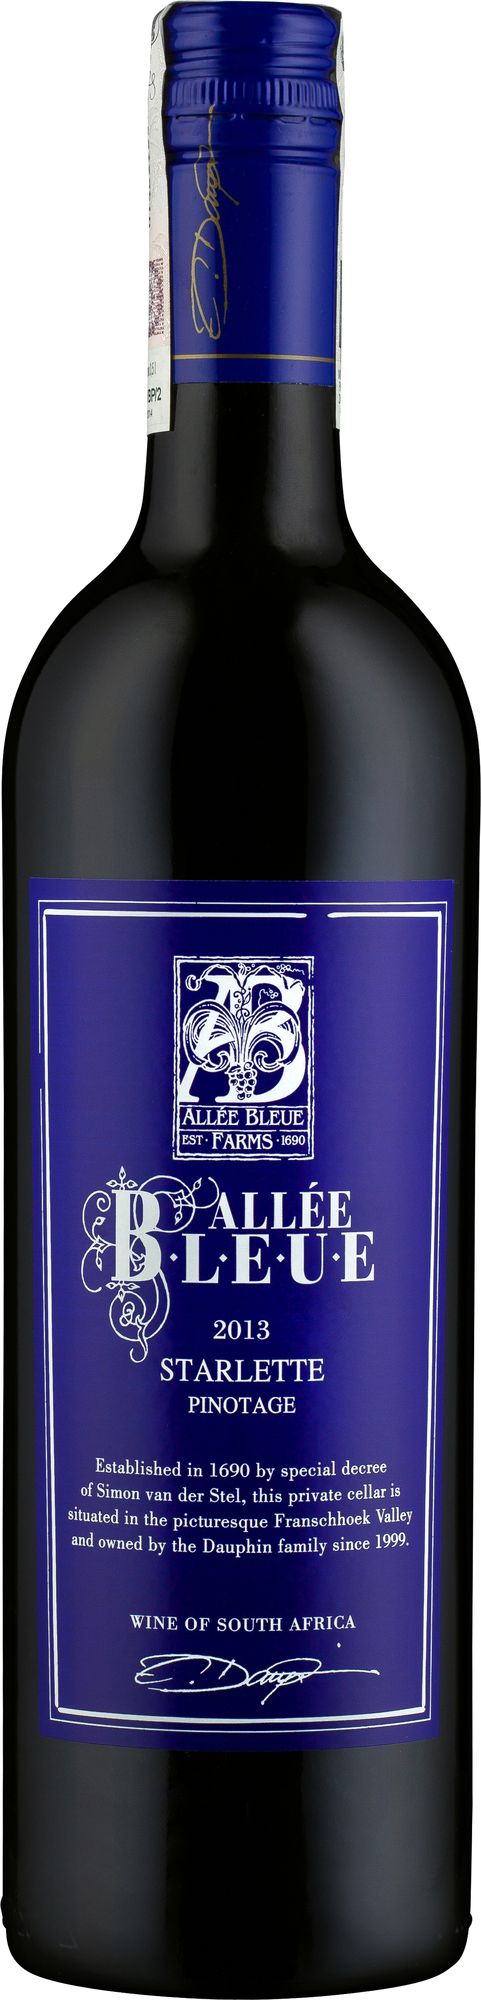 Wino Allée Bleue Starlette Pinotage Franschhoek WO